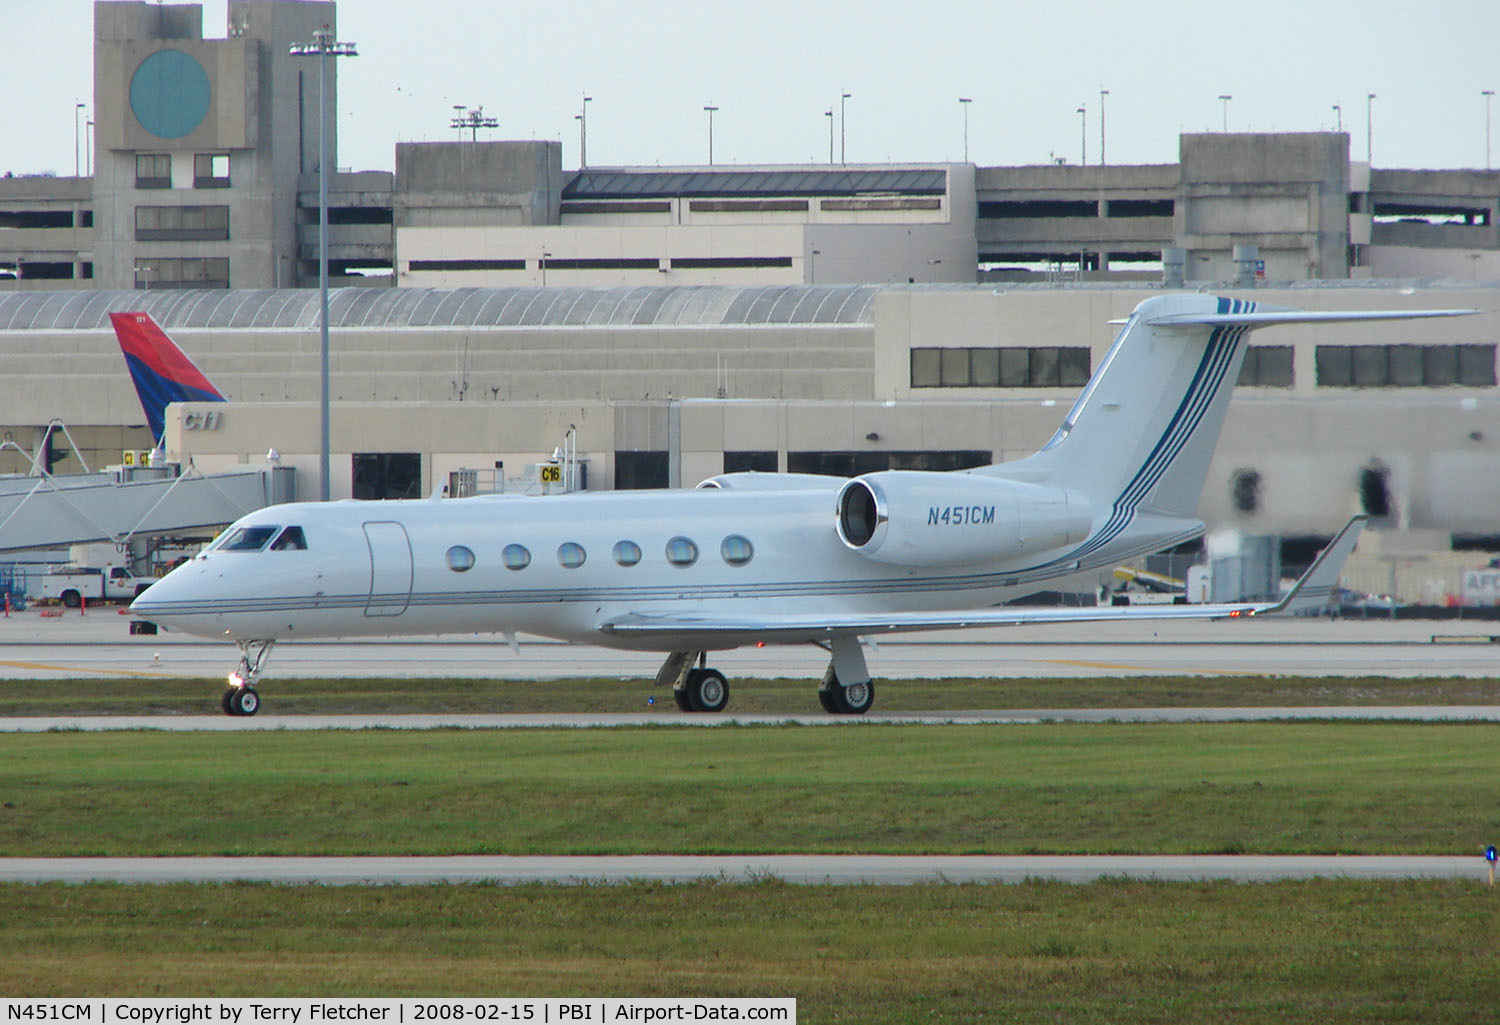 N451CM, 2005 Gulfstream Aerospace GIV-X (G450) C/N 4024, The business aircraft traffic at West Palm Beach on the Friday before President's Day always provides the aviation enthusiast / photographer with a treat